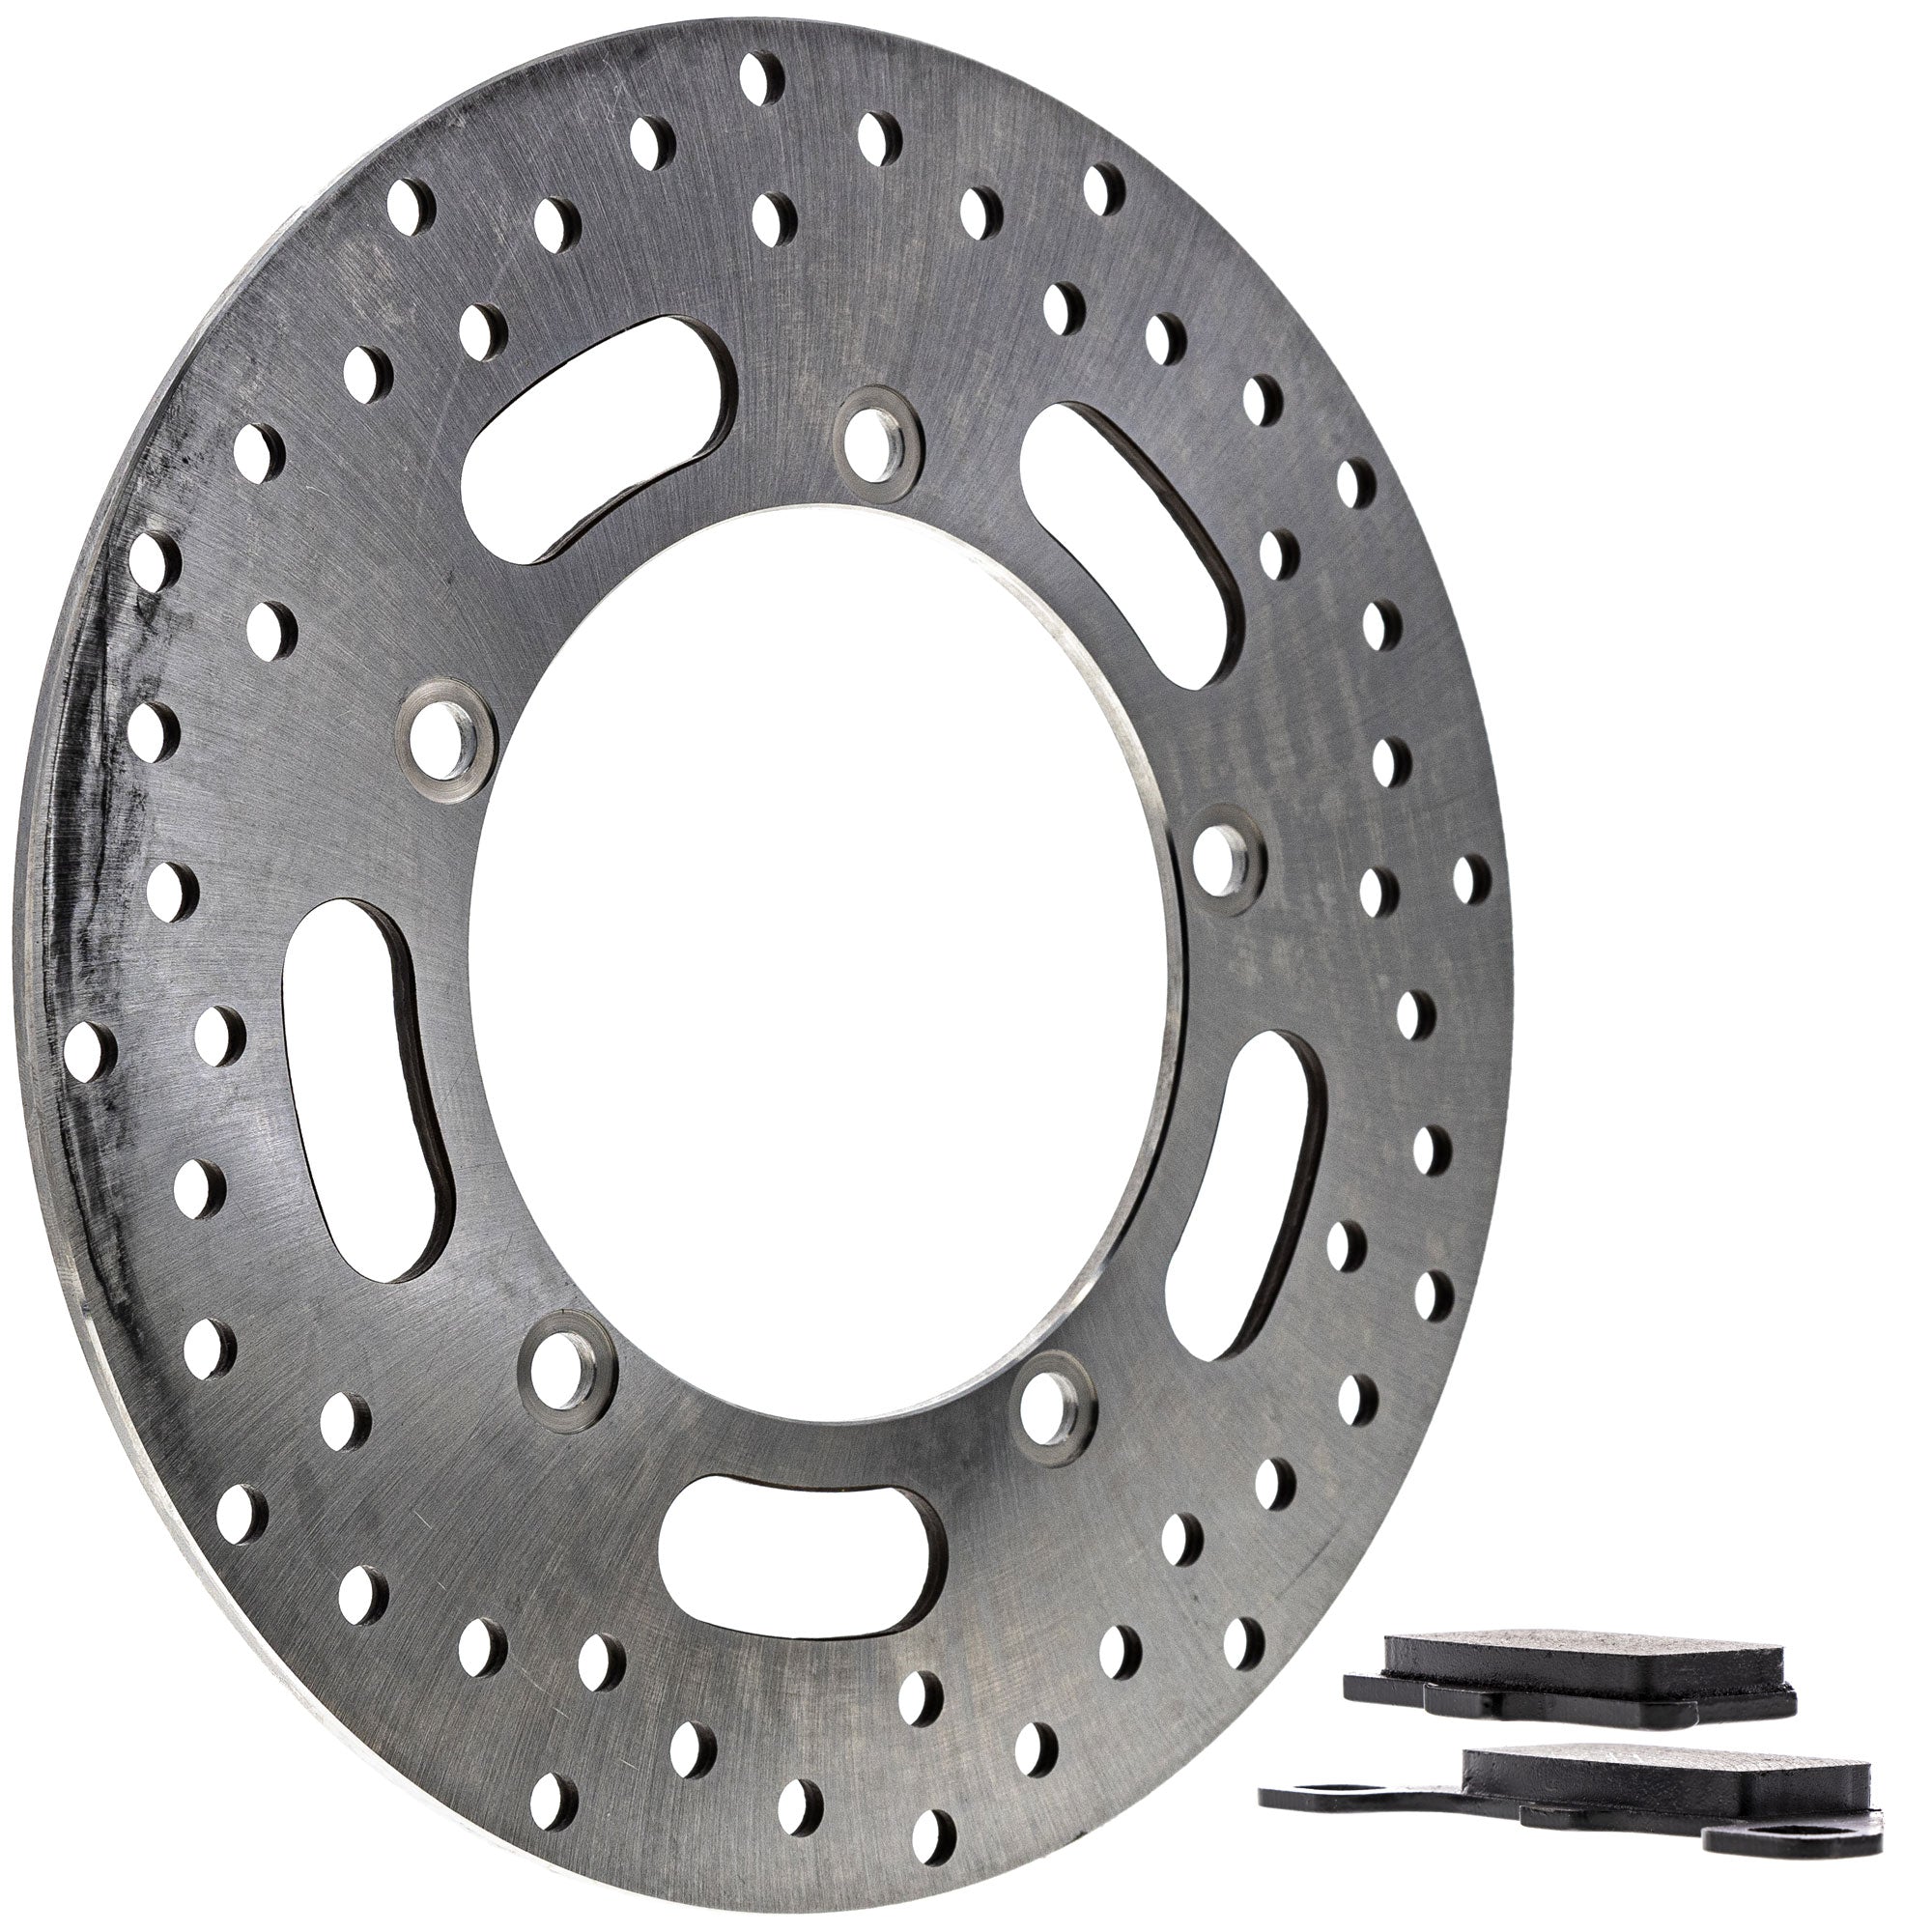 Single Pad and Rotor Set for zOTHER Polaris 700 43082-1194 43082-1062 43082-1029 NICHE MK1007471